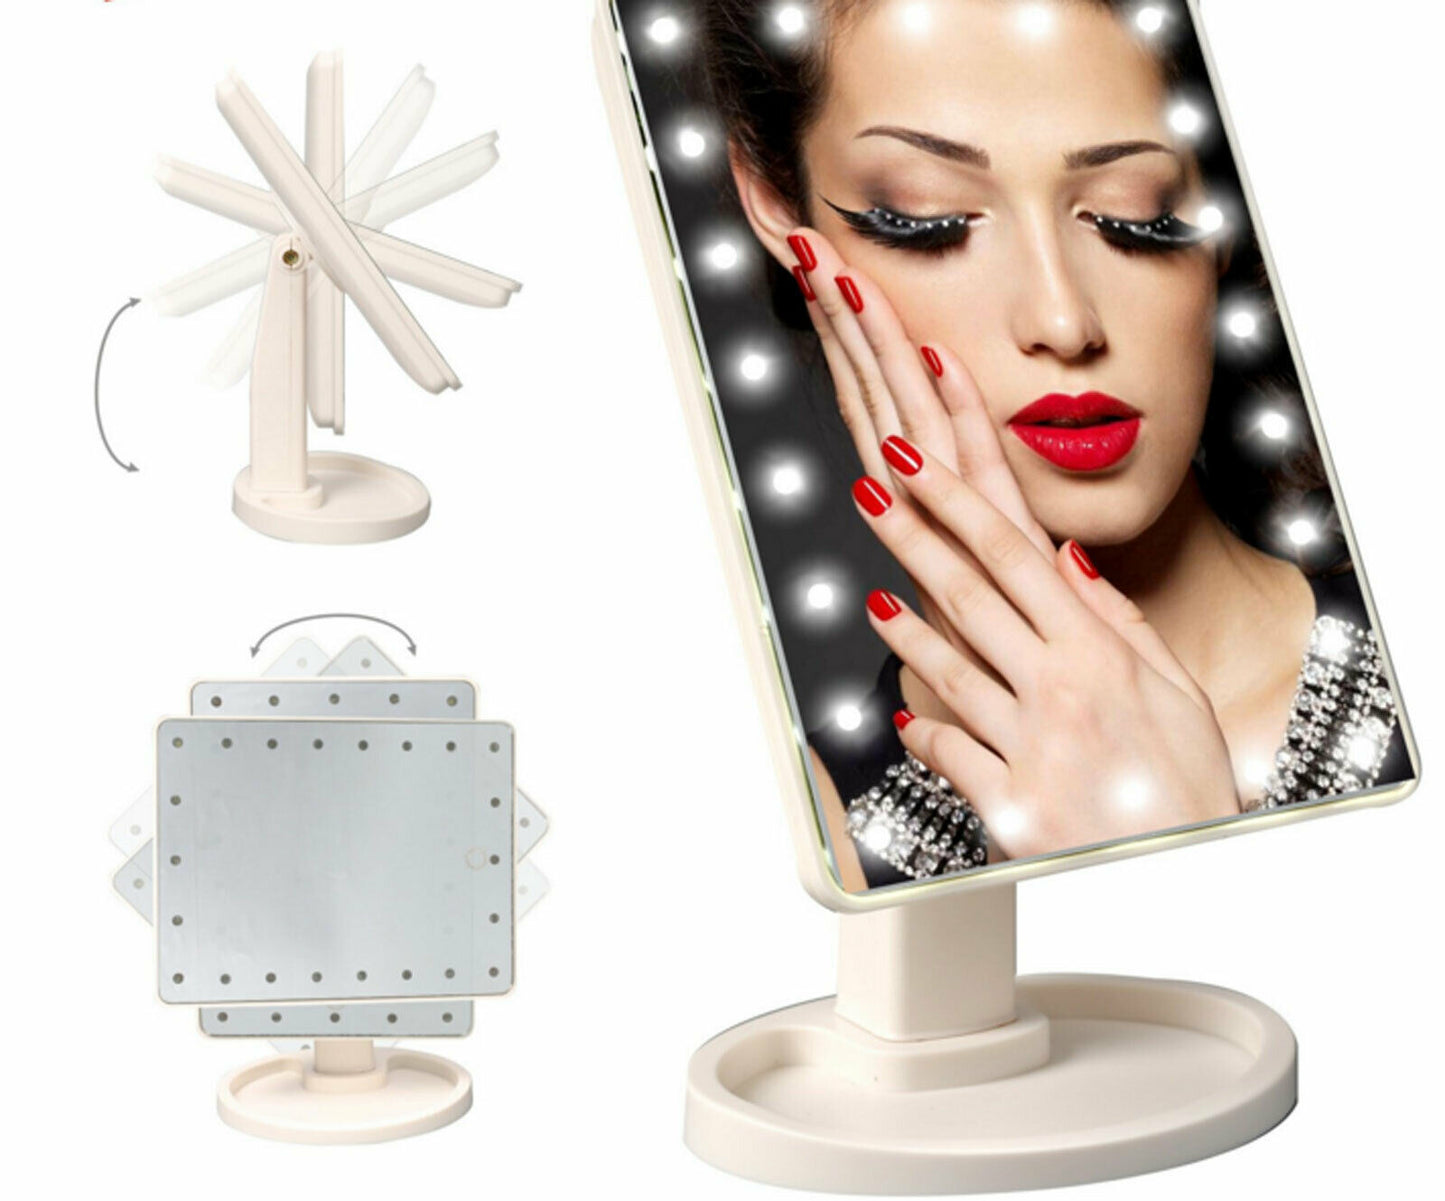 Portalble LED Touch Screen Makeup Mirror Light Rotation Vanity Lights Touch